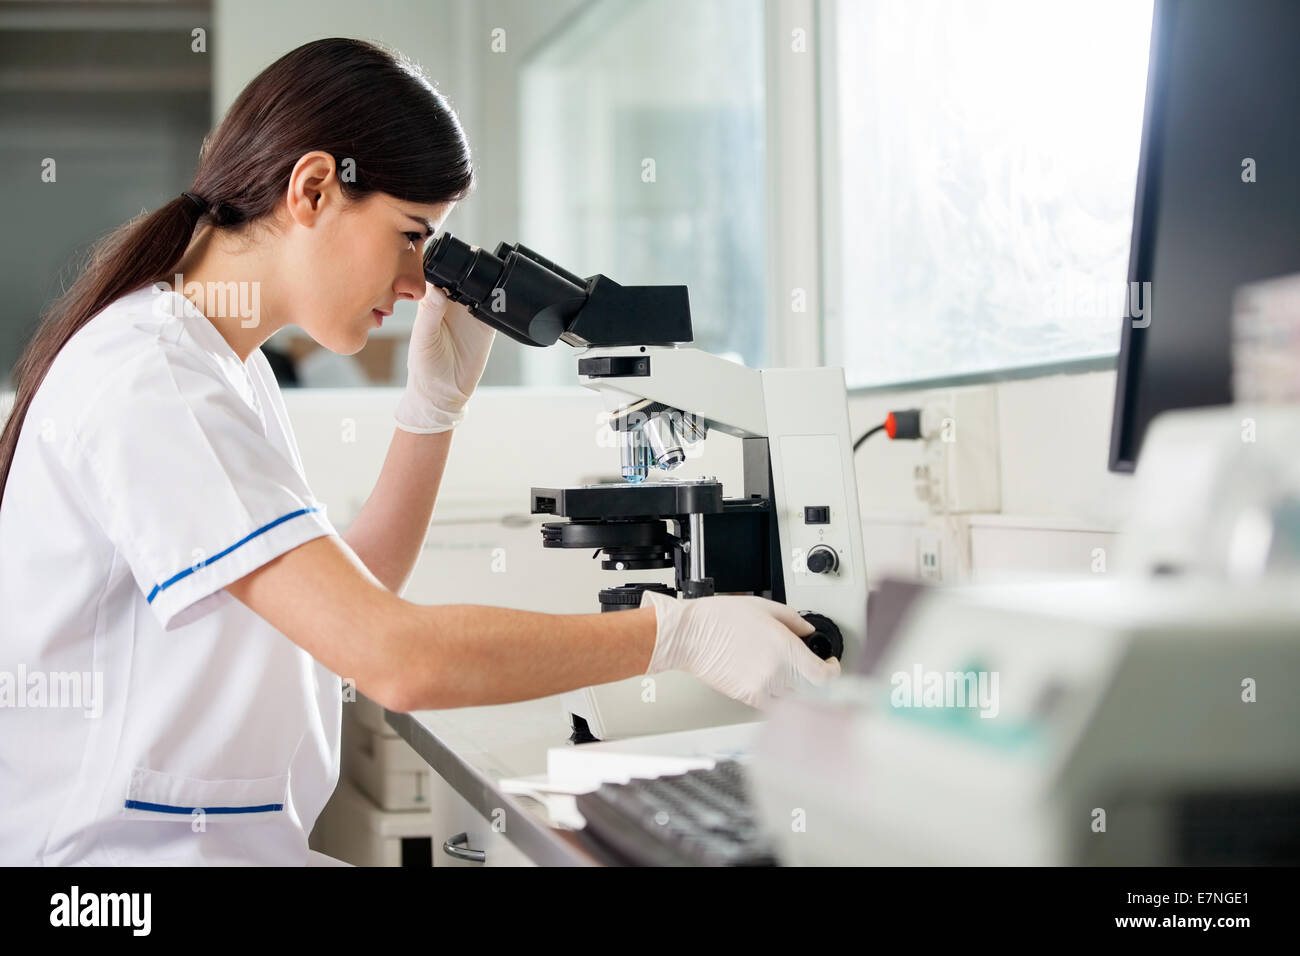 Female scientist looking through microscope Banque D'Images